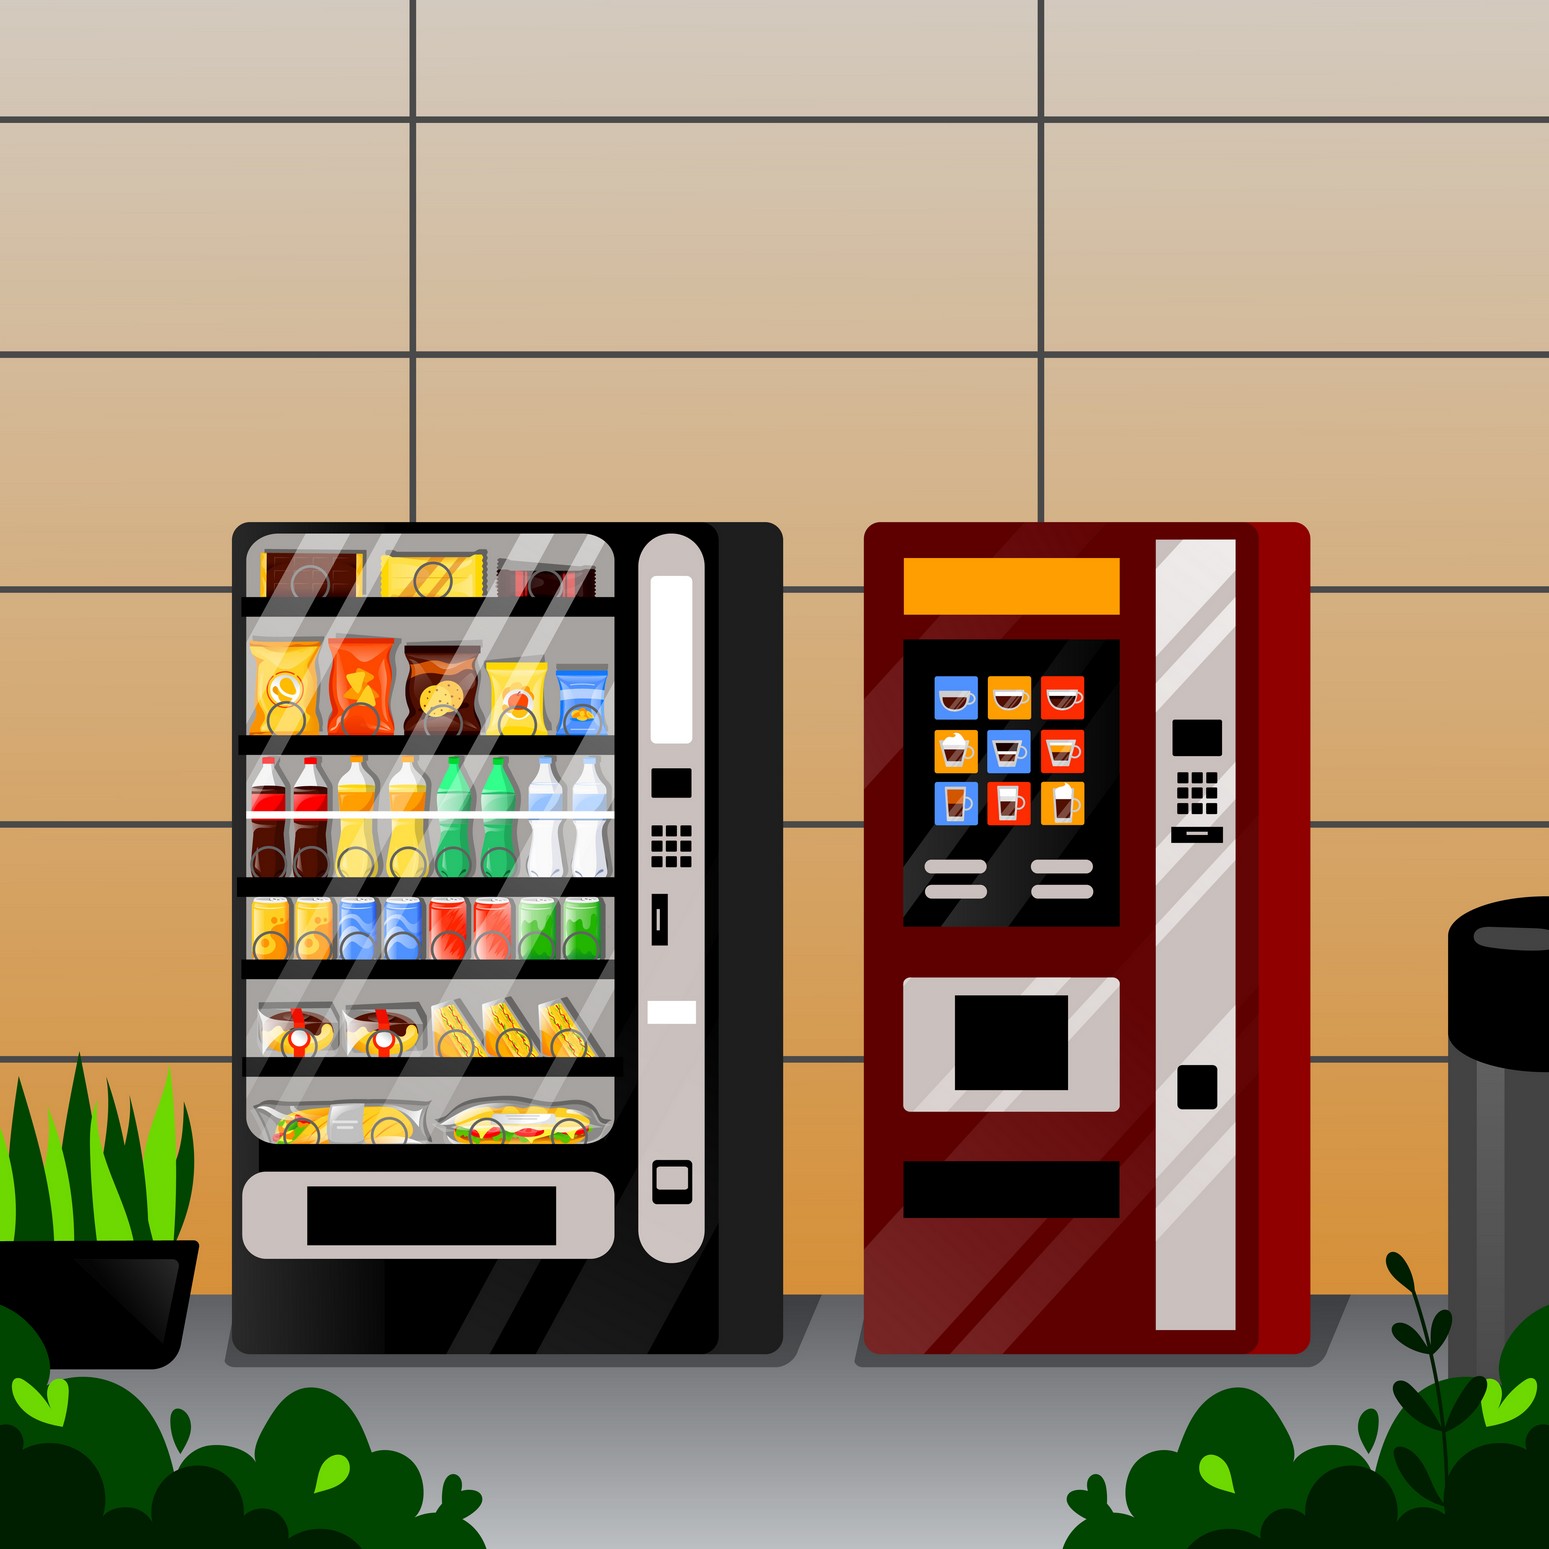 Tallahassee Corporate Wellness | Better-for-you Products | Healthy Vending Options